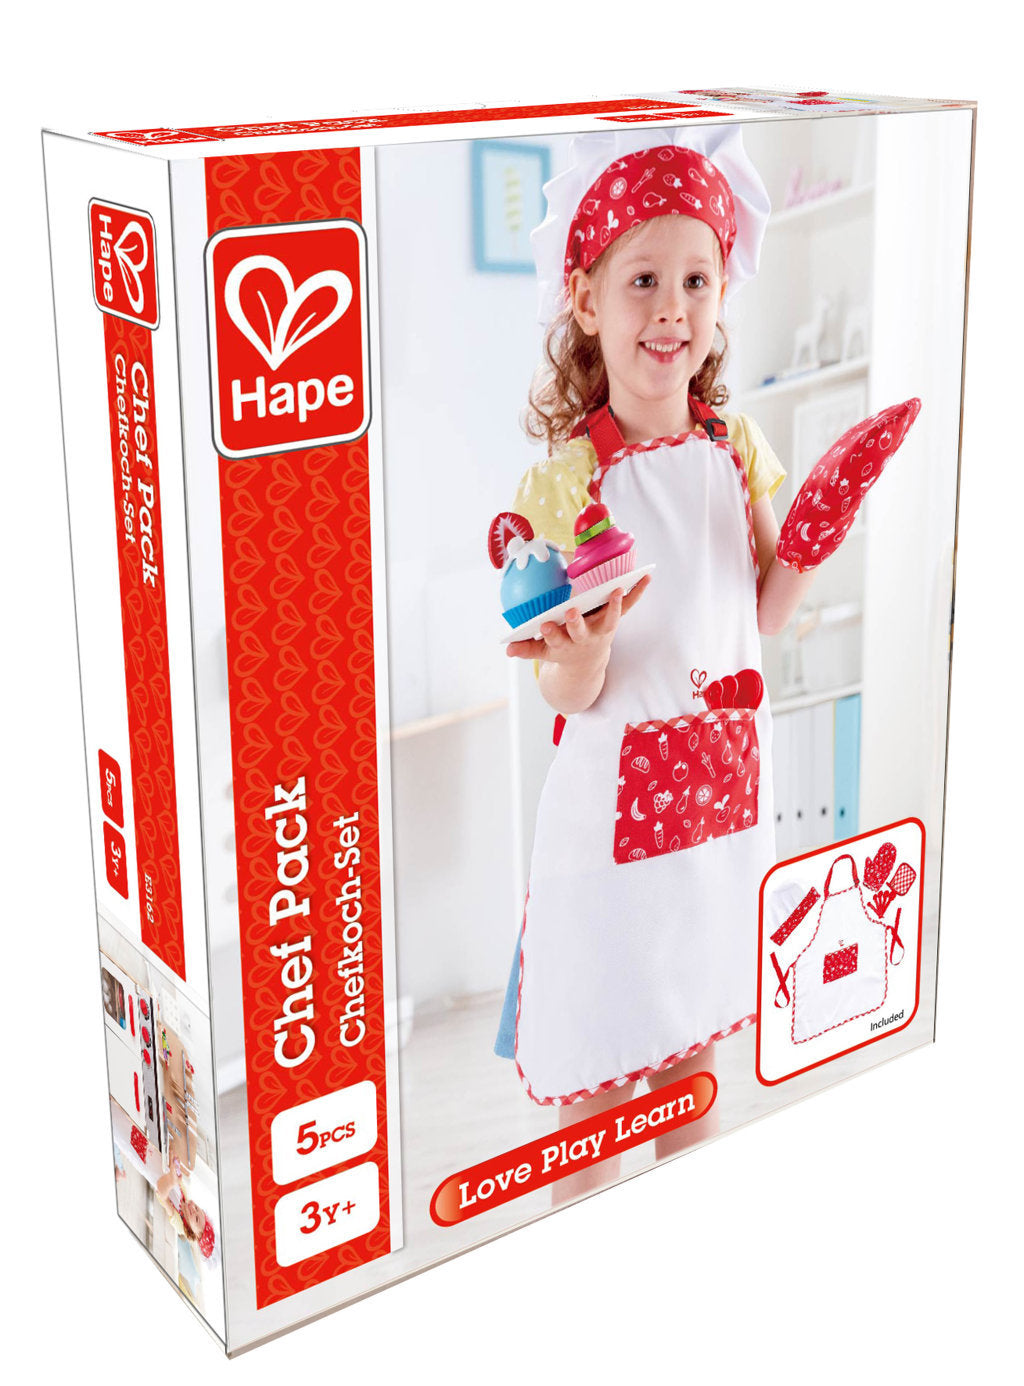 Hape Chefs Pack imaginative play quality wooden toys The Toy Wagon